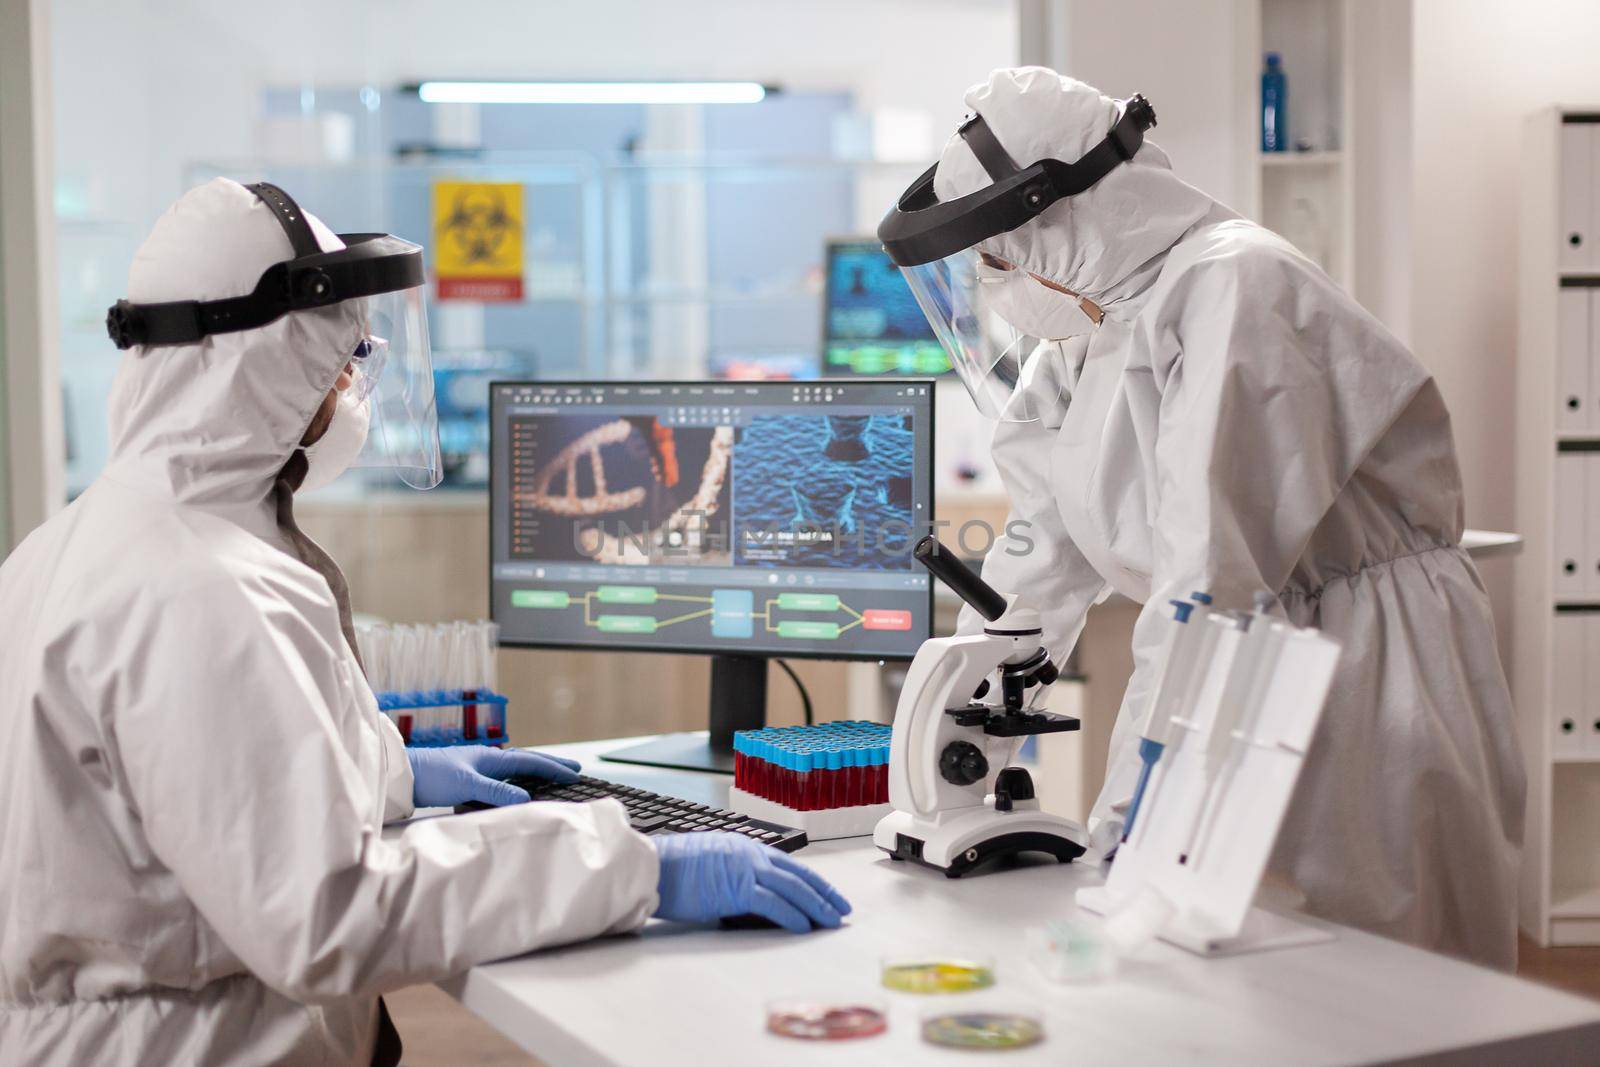 Scientists in protection suits analysing dna sample infected with virus. by DCStudio